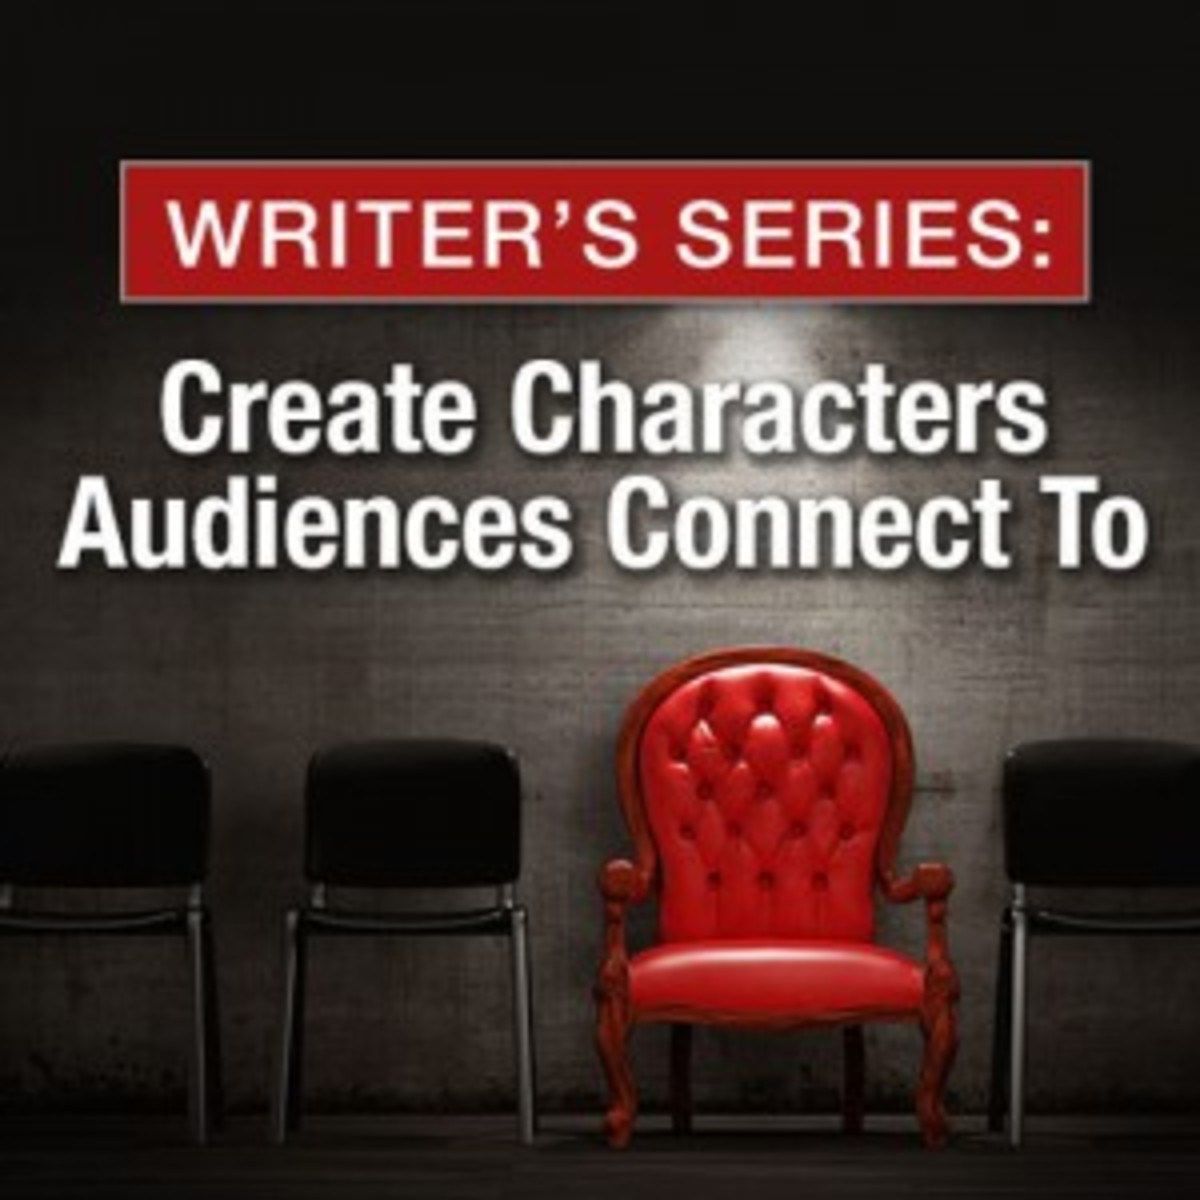 Writer's Series: Create Characters Audiences Connect To